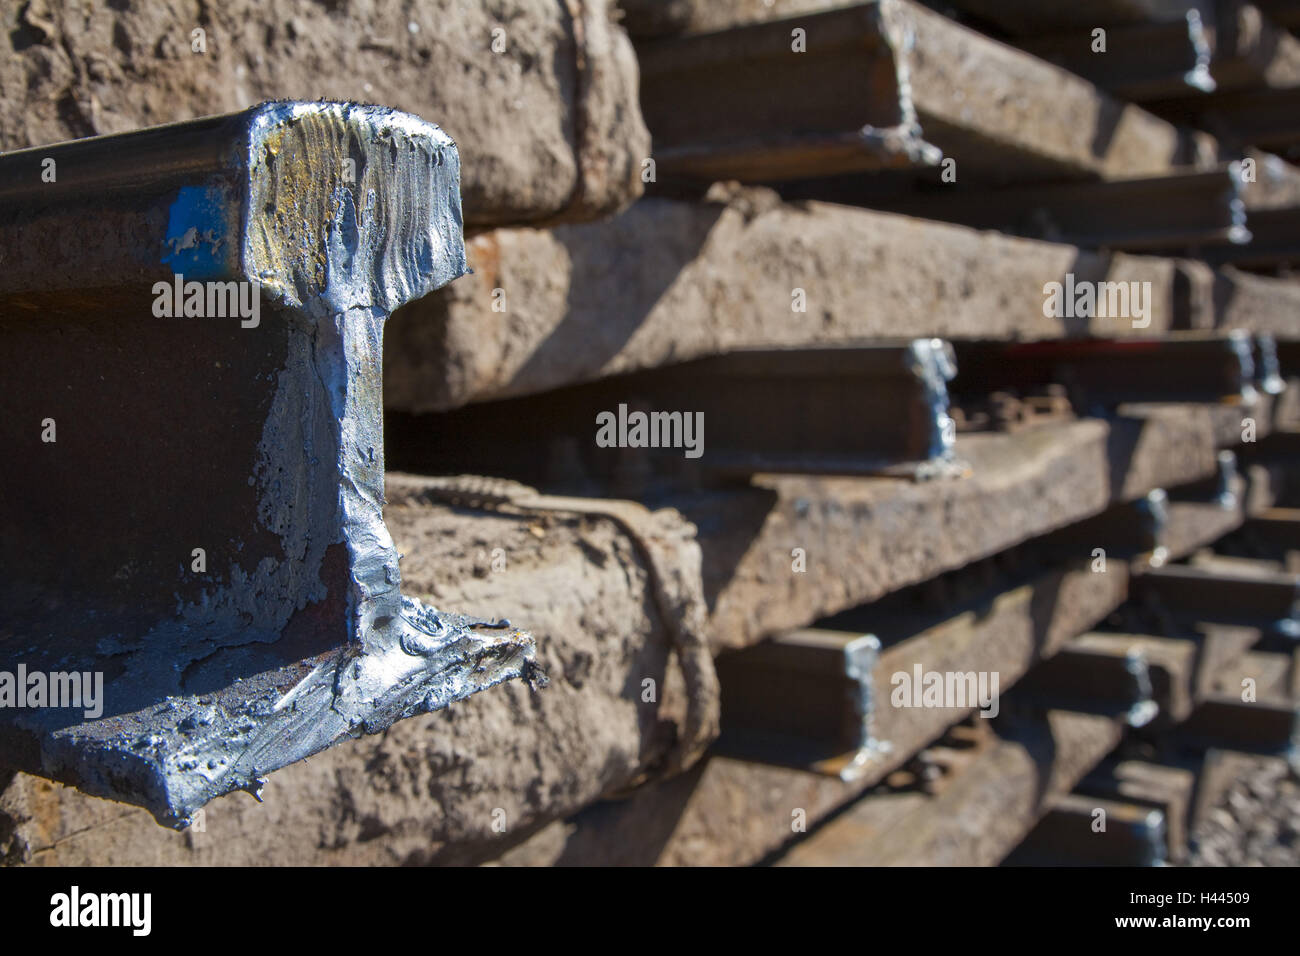 Ties, rails, old, stacked, disposal, recycling, Stock Photo